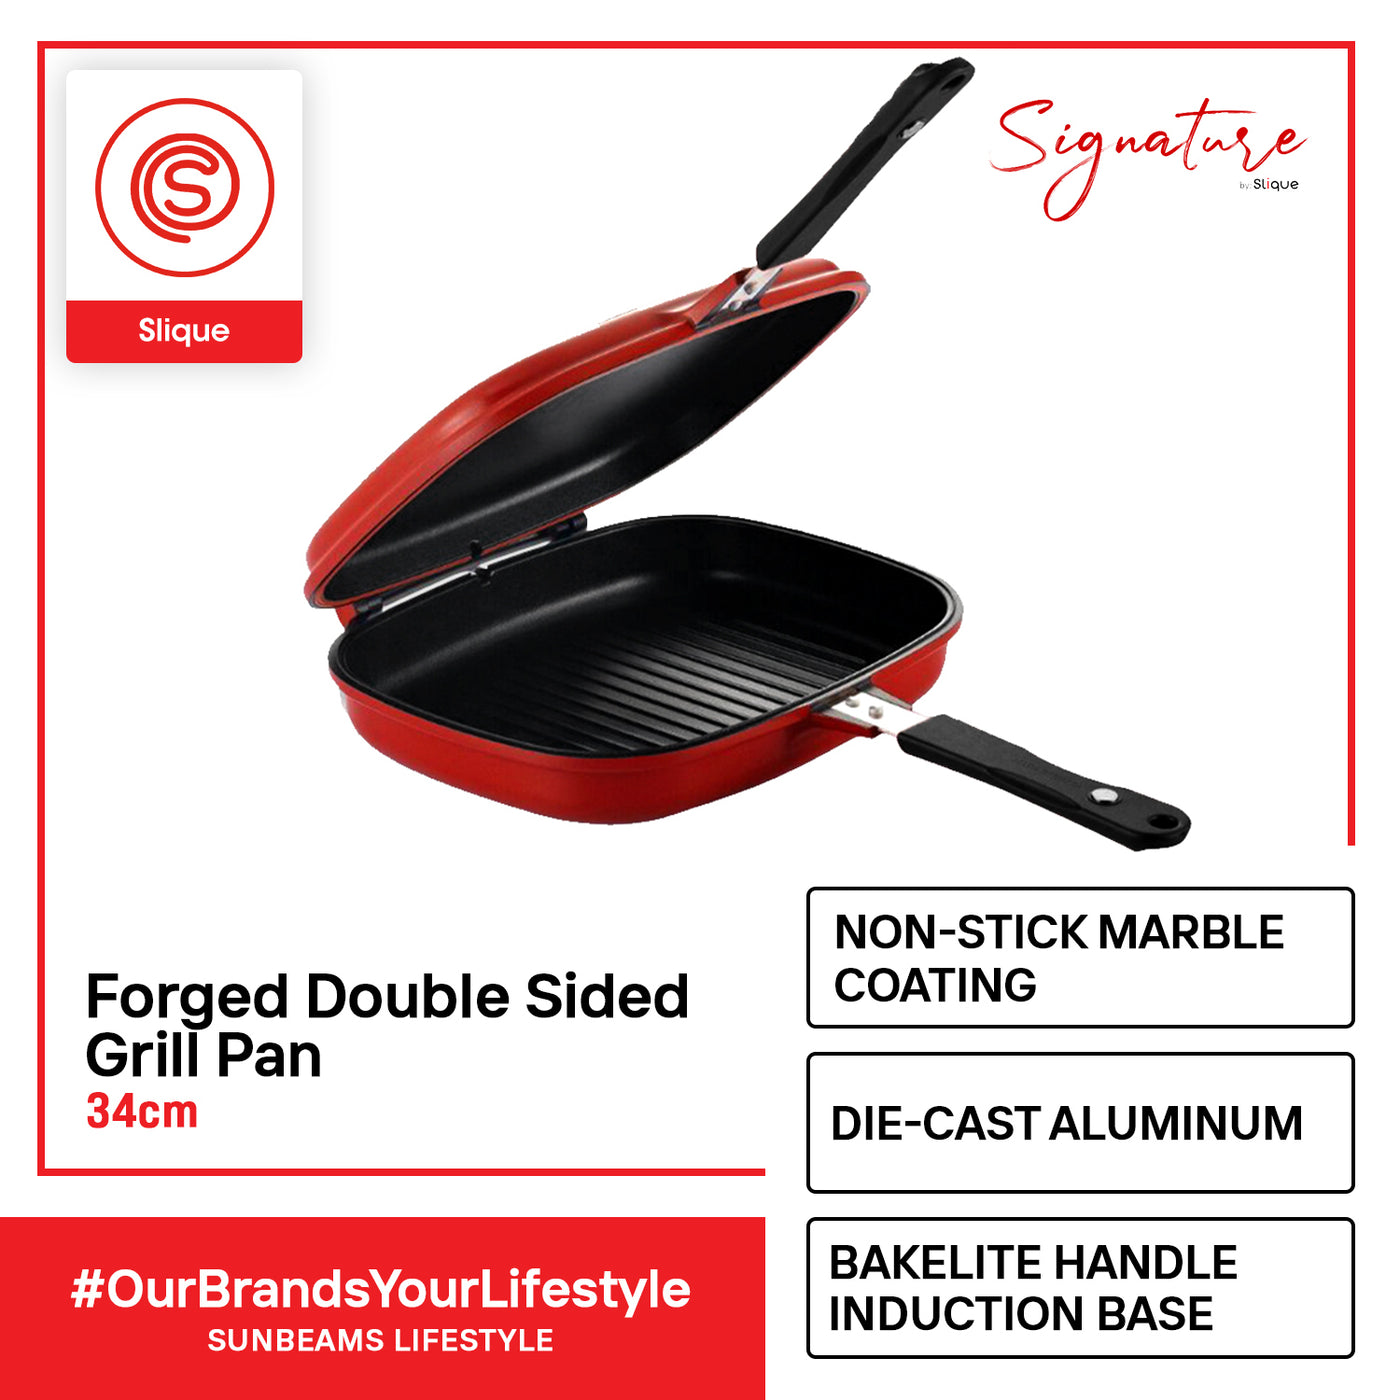 SIGNATURE by Slique Forged Double Sided Portable Grill Pan Non-Stick Coating Magnetic Amazing Gift Idea For Any Occasion!